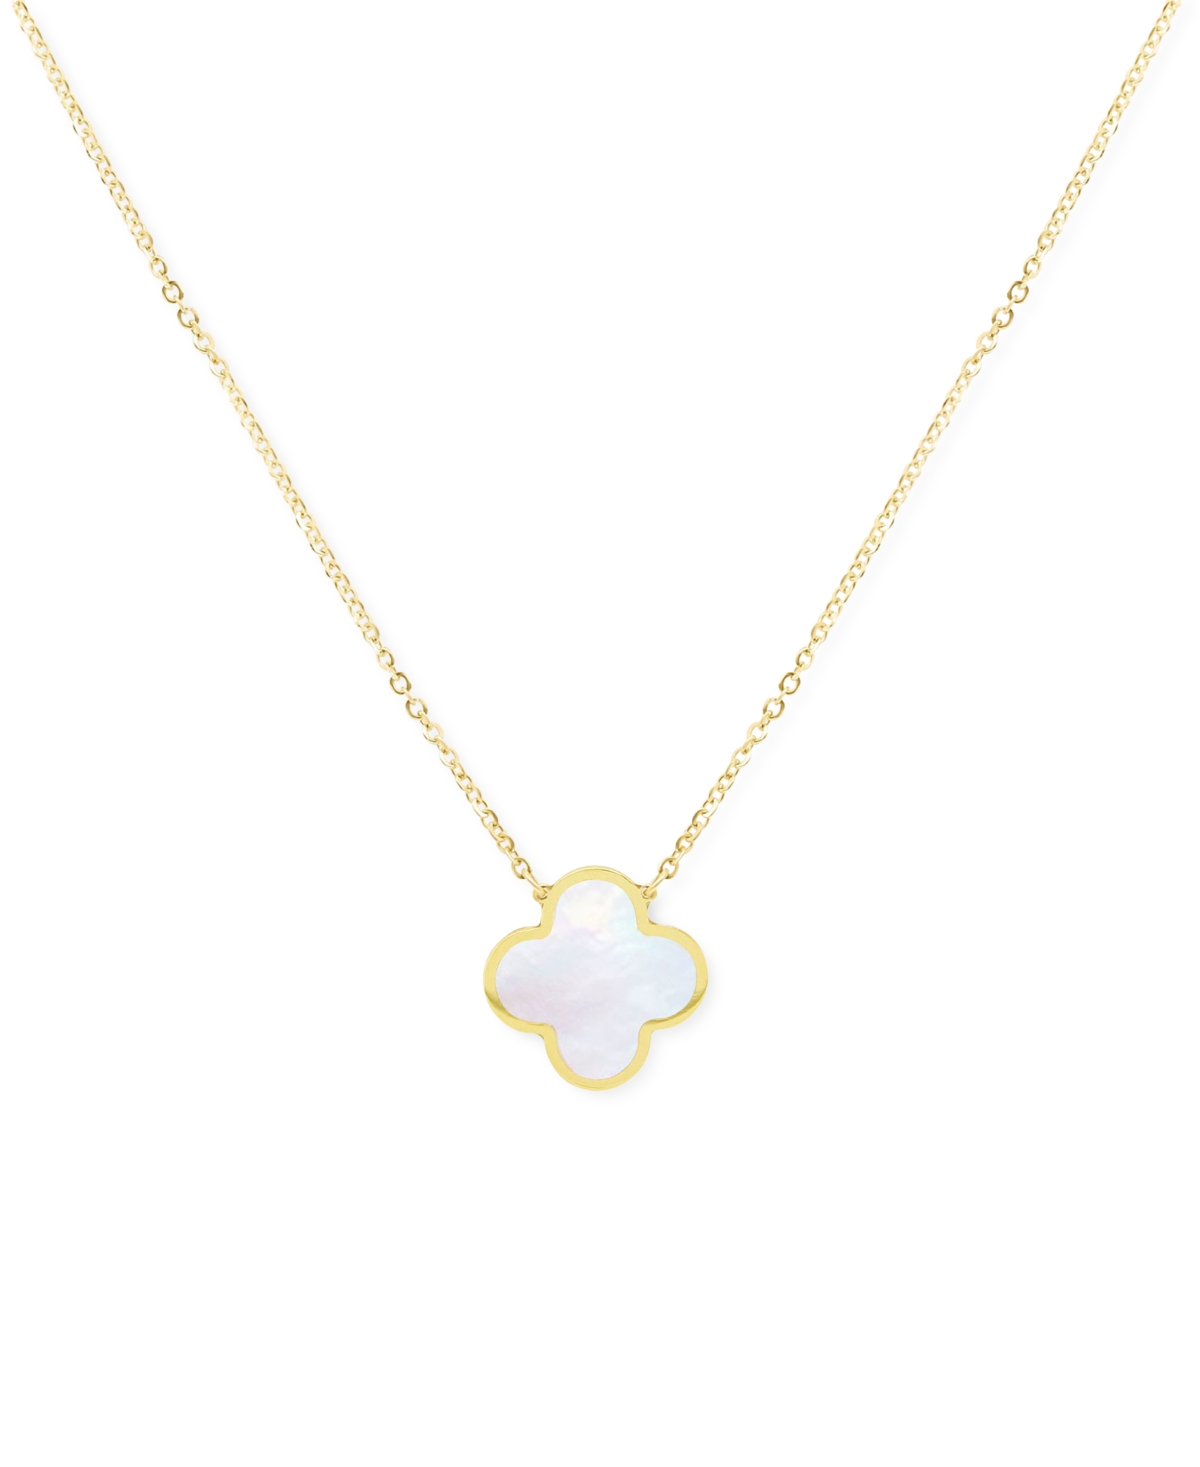 THE LOVERY CLOVER 18" PENDANT NECKLACE IN 14K GOLD